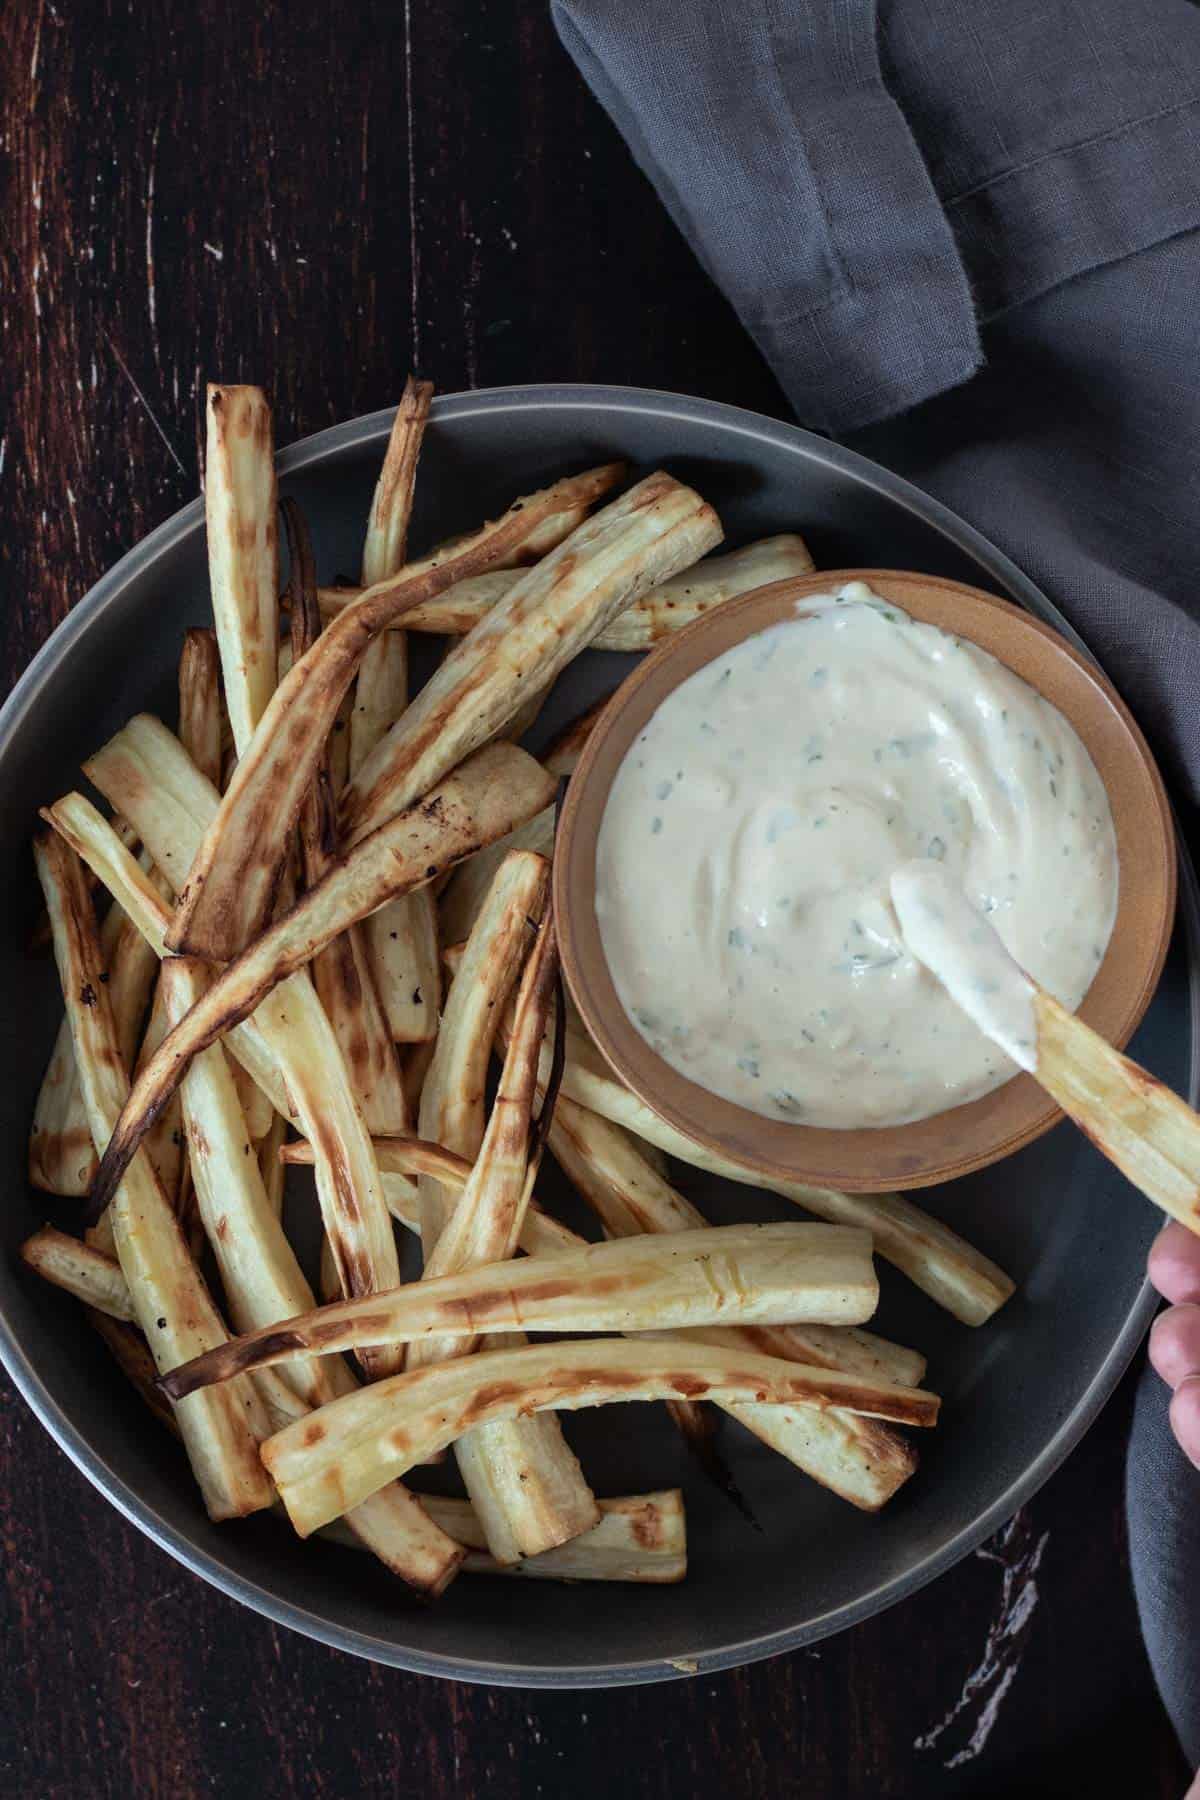 Dipping one parsnip fry into the tarragon aioli sauce.